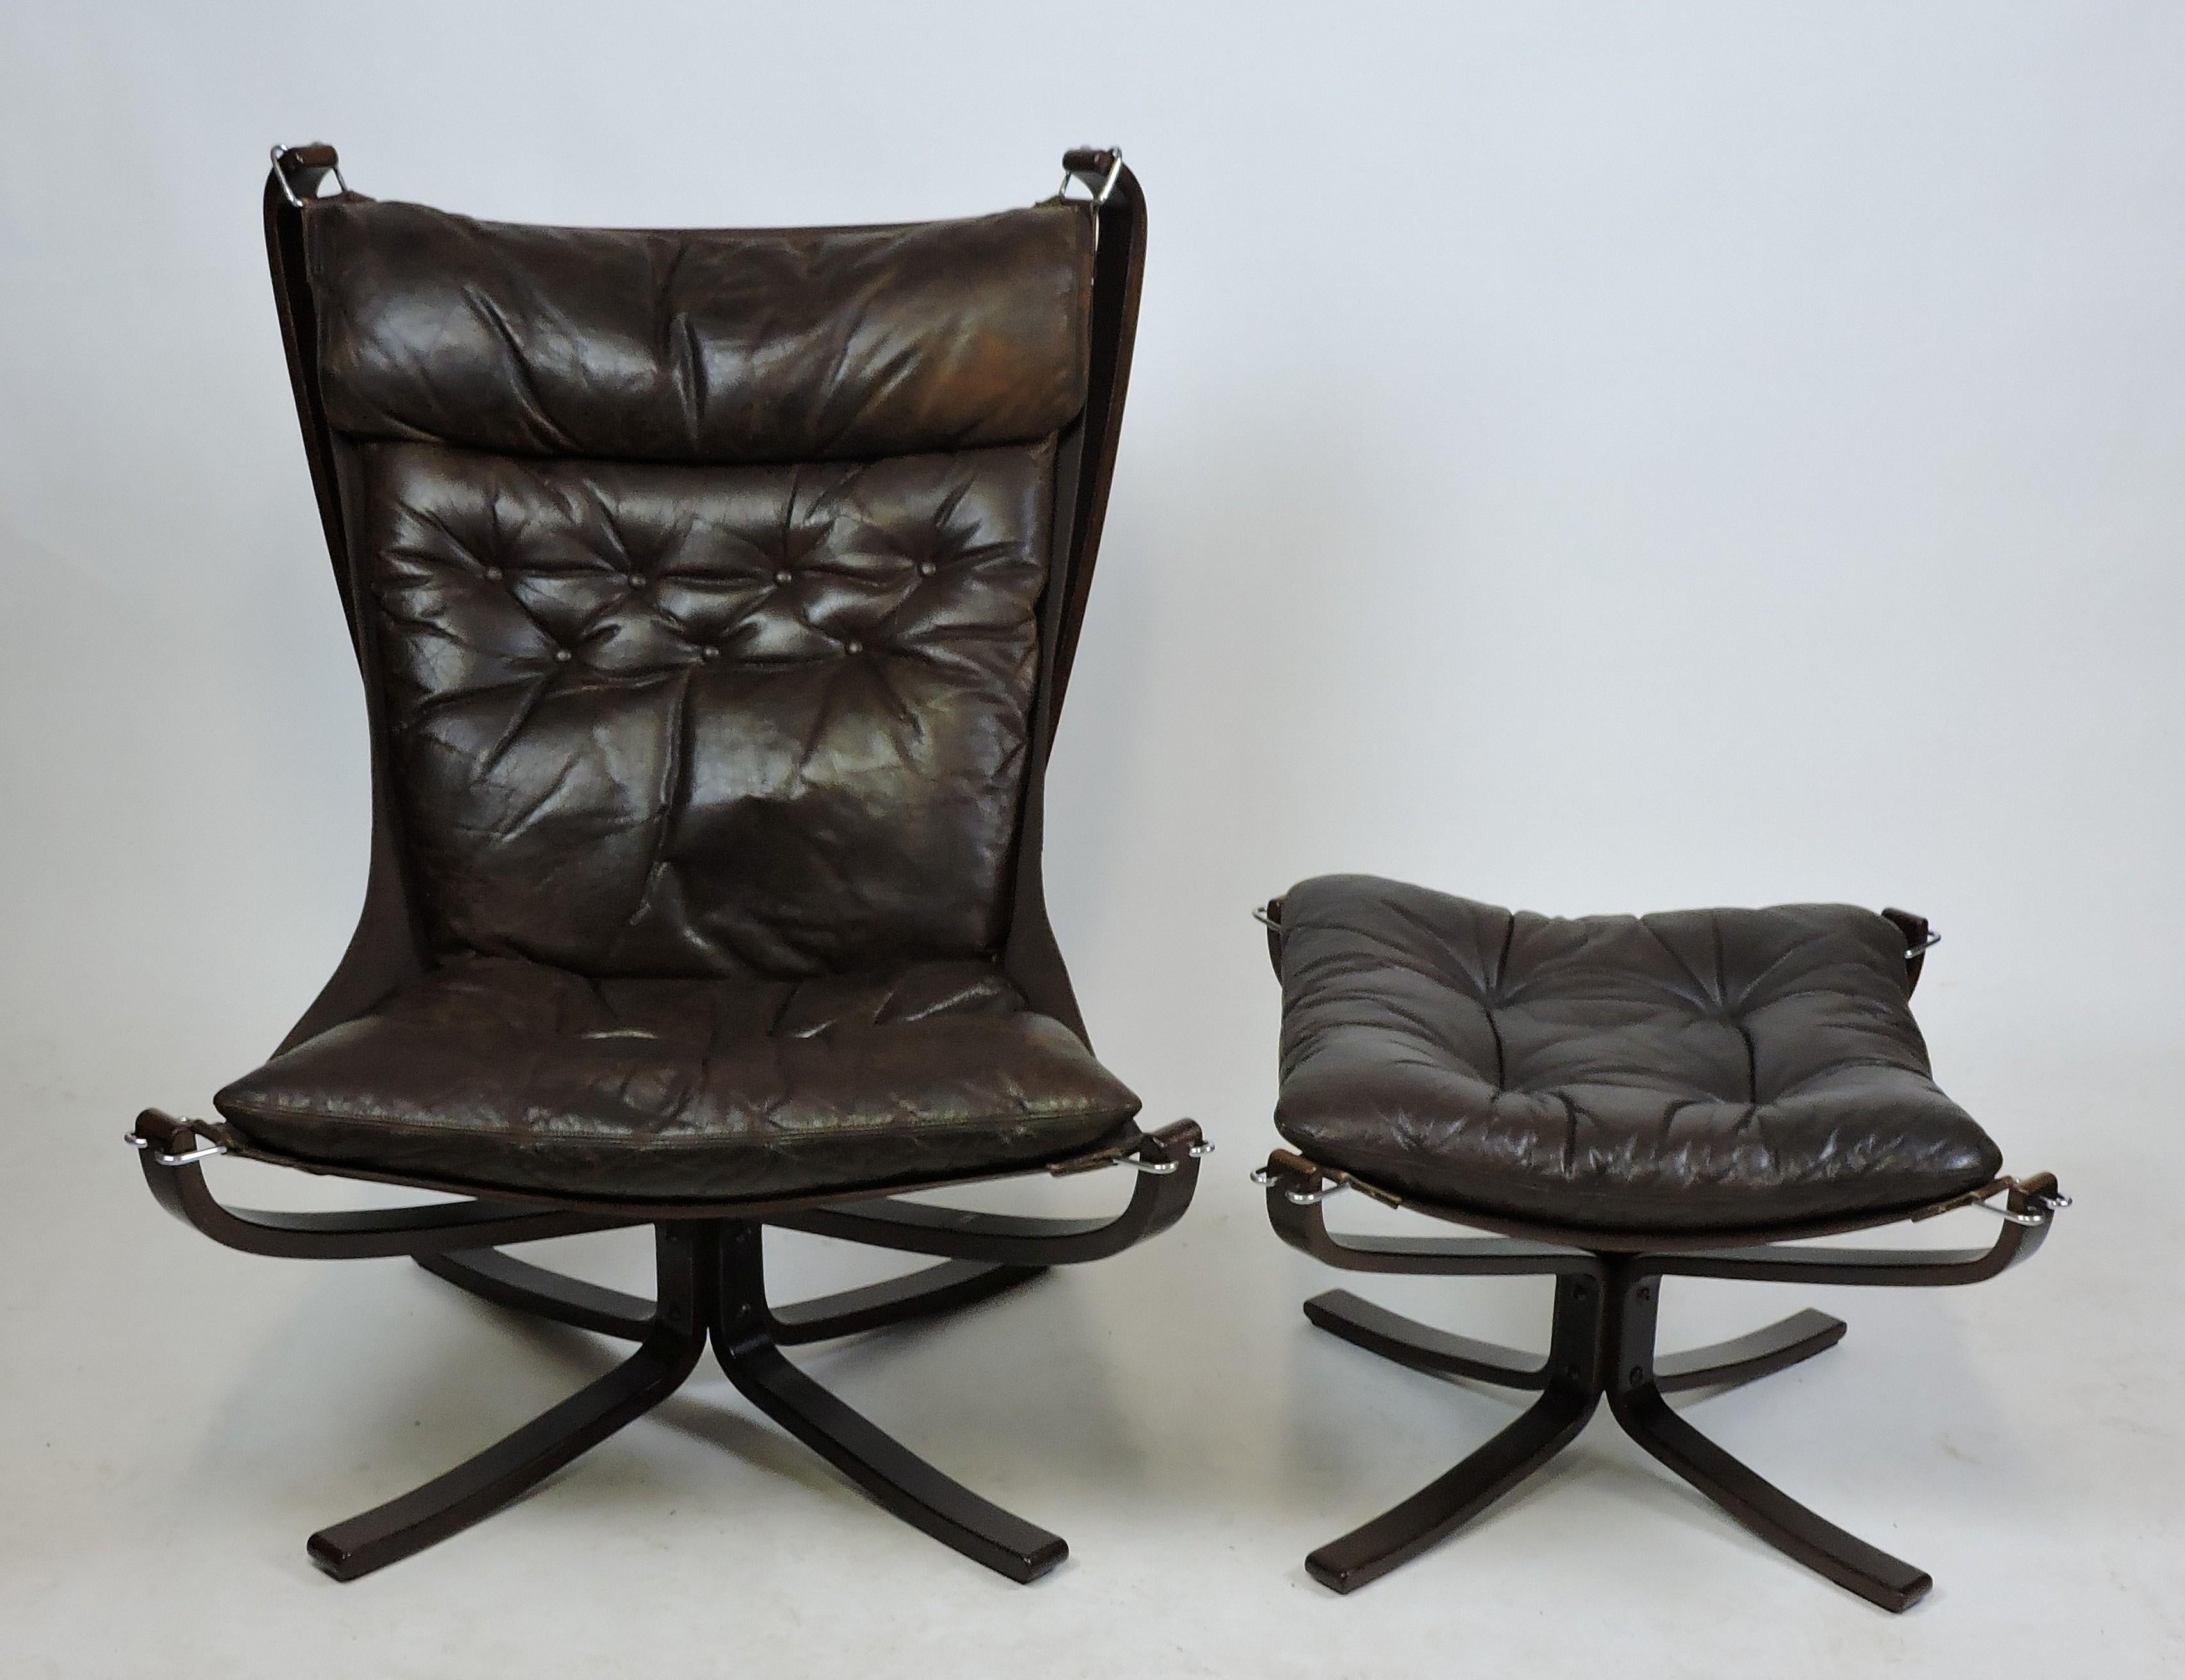 Sleek and sexy falcon high back lounge chair and ottoman designed by Sigurd Ressel and made in Norway by Vatne Mobler. This very comfortable chair has a bentwood frame made of rosewood stained beech with a dark chocolate brown leather cushion that